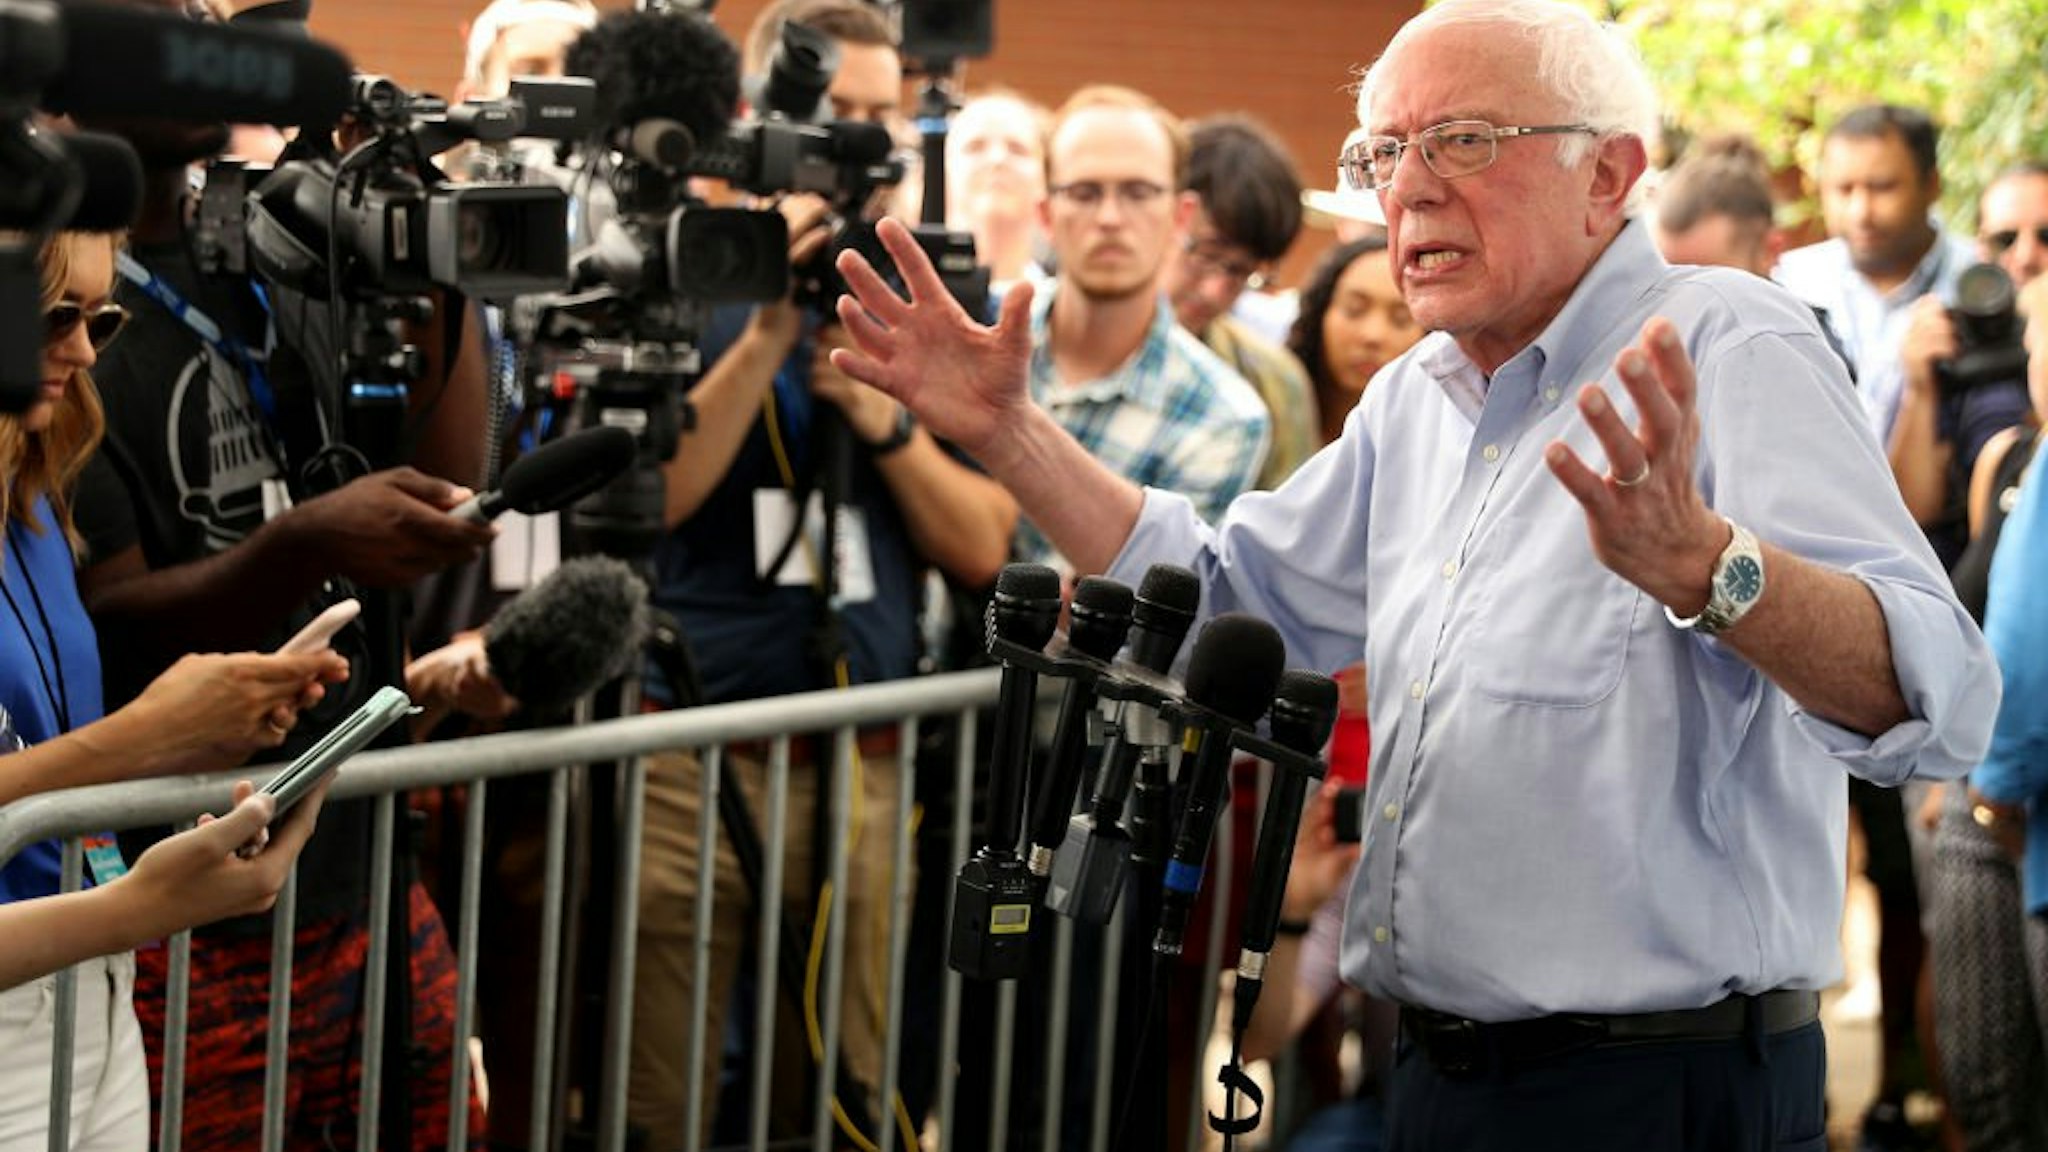 Democratic presidential candidate Sen. Bernie Sanders (I-VT) talks to journalists after speaking at the Des Moines Register Political Soapbox during the Iowa State Fair August 11, 2019 in Des Moines, Iowa.